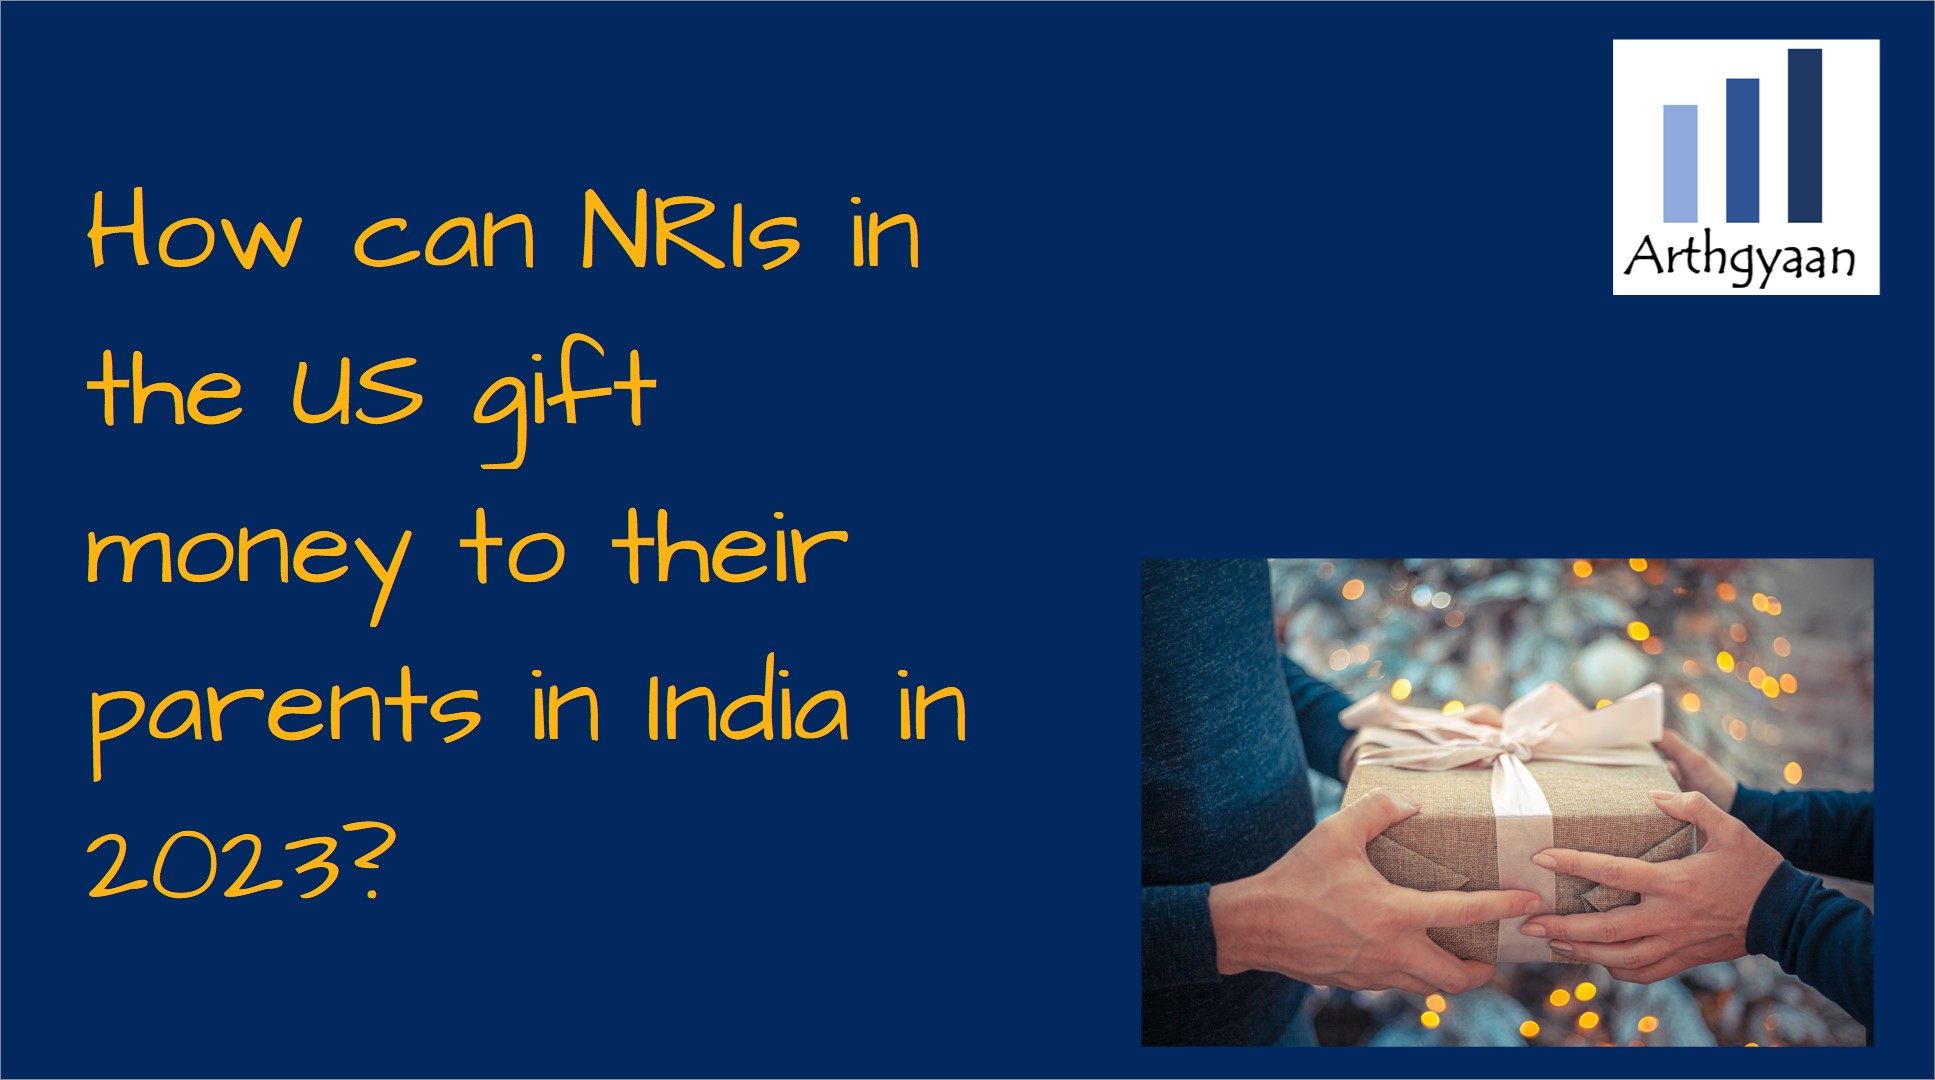 <p>This article discusses the mechanics and tax exemption rules applicable to US-based NRIs who wish to gift money to their parents in India.</p>

